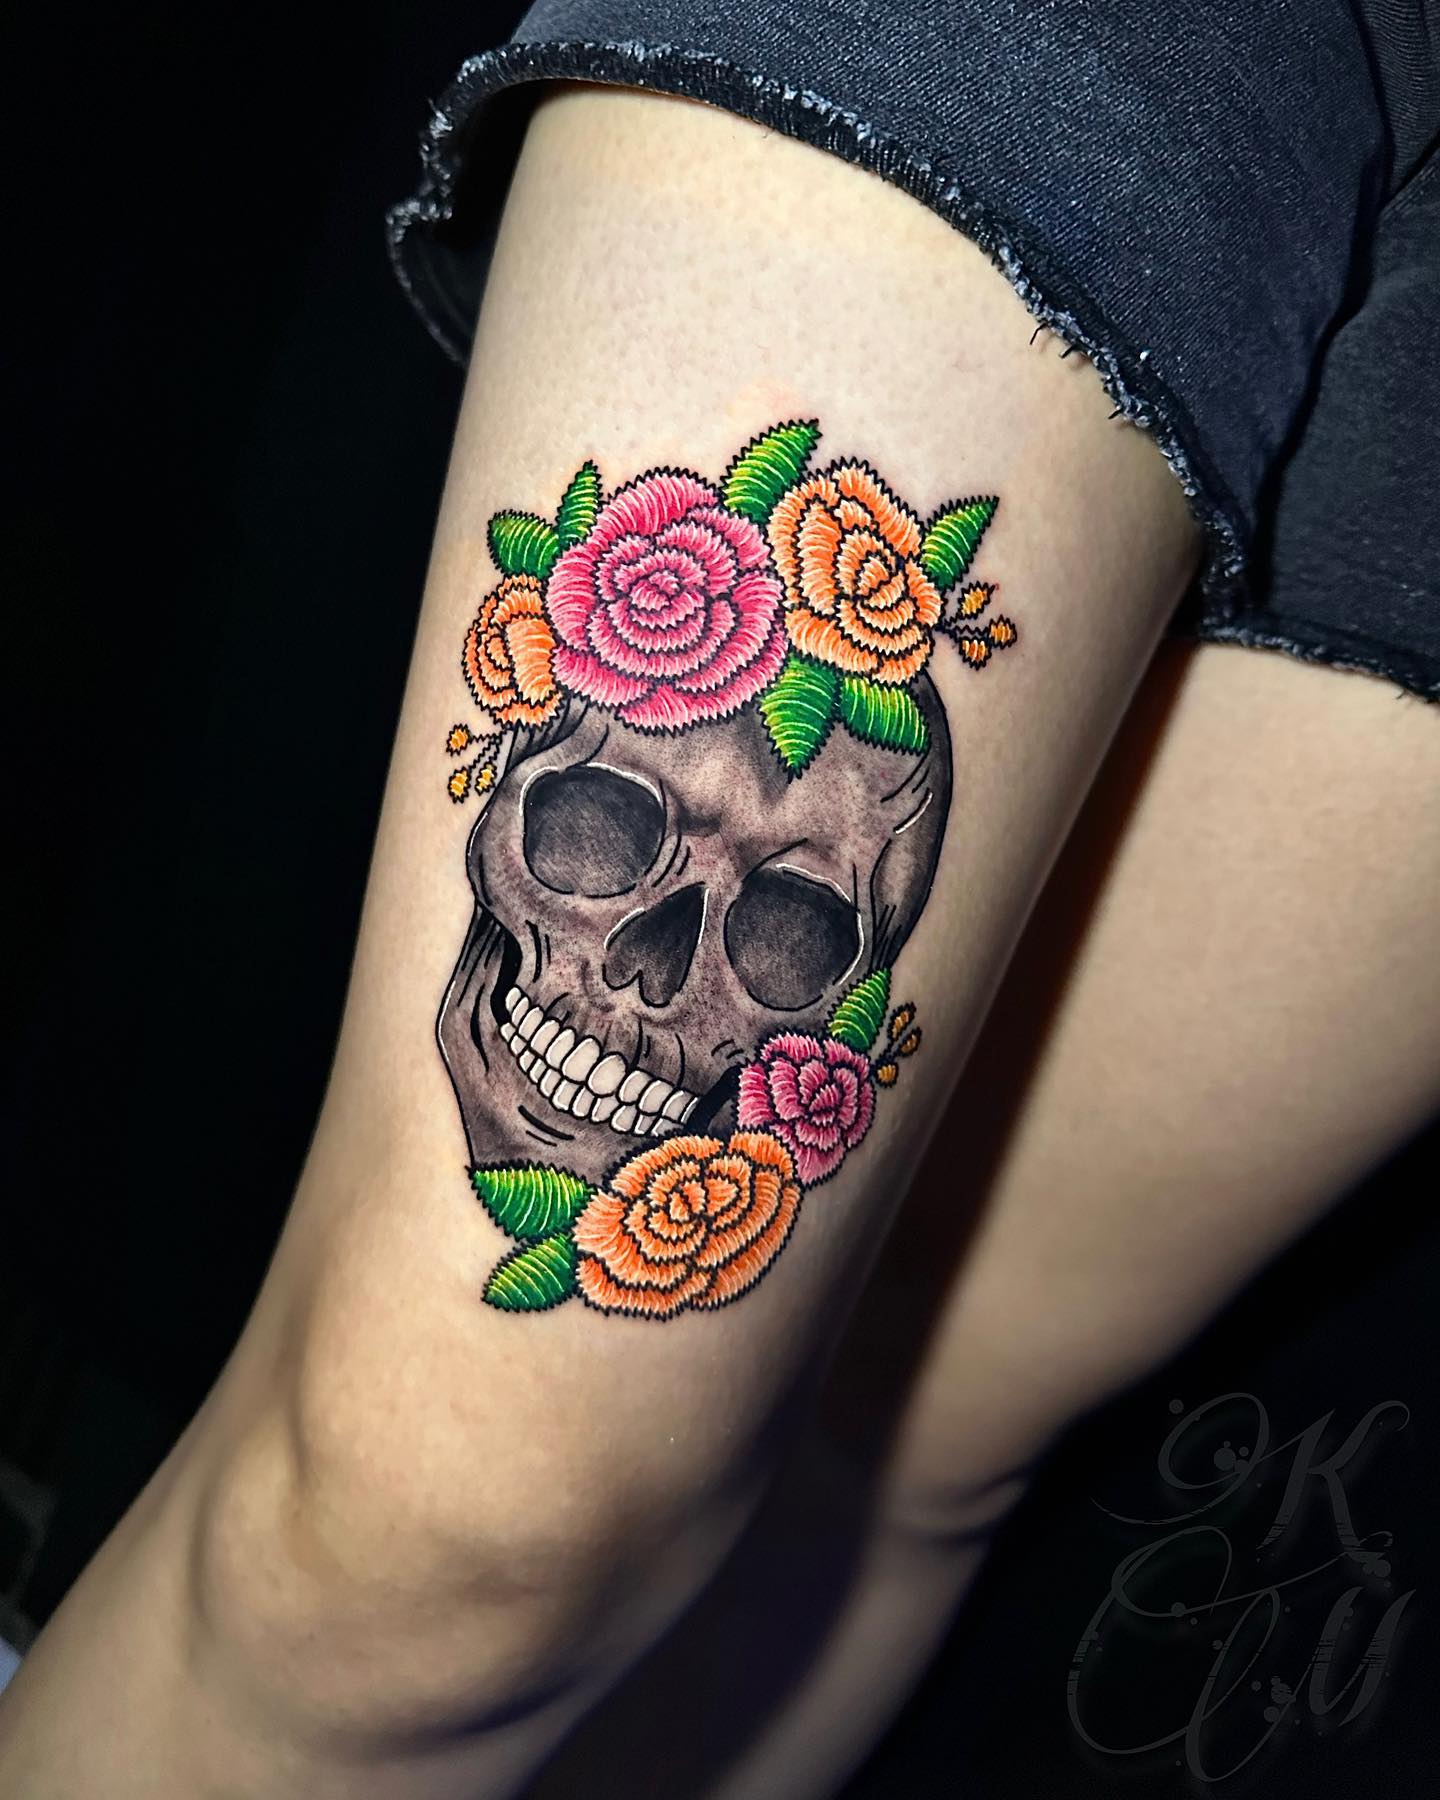 Realistic skull tattoo surrounded by embroidery of roses